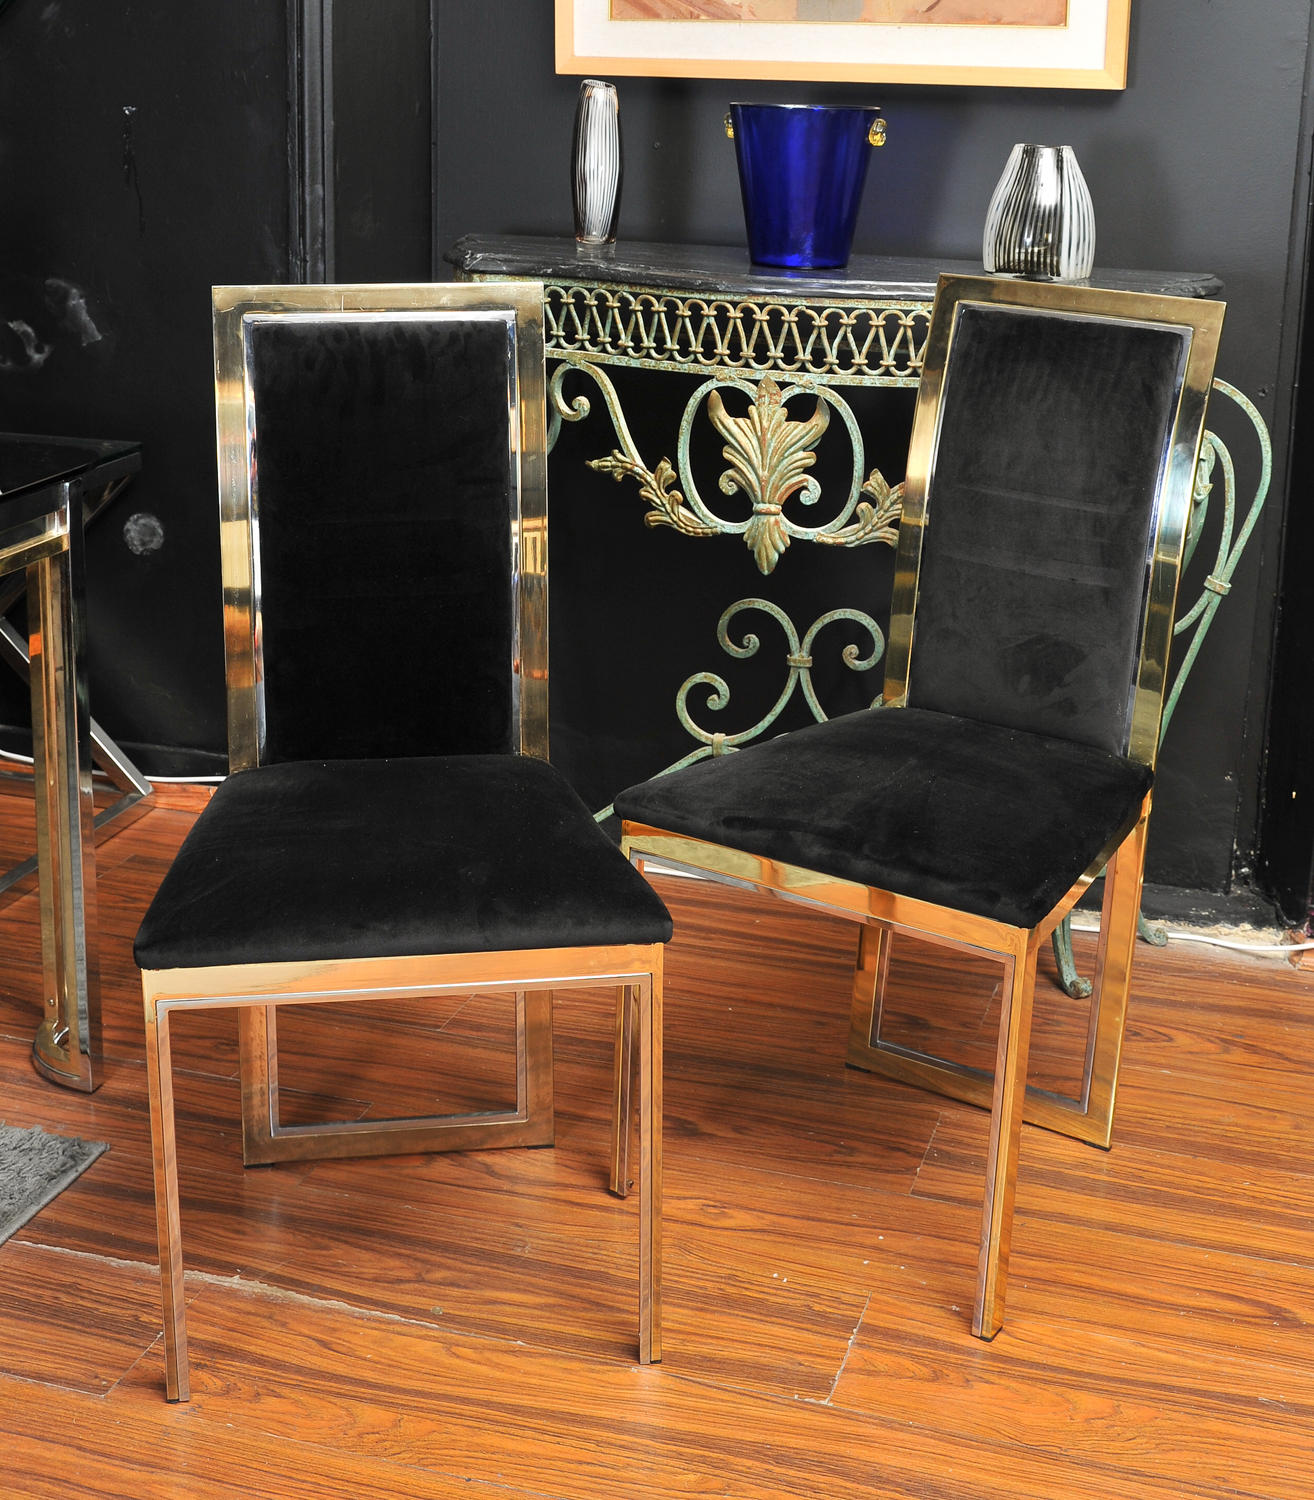 Brass and chrome chairs